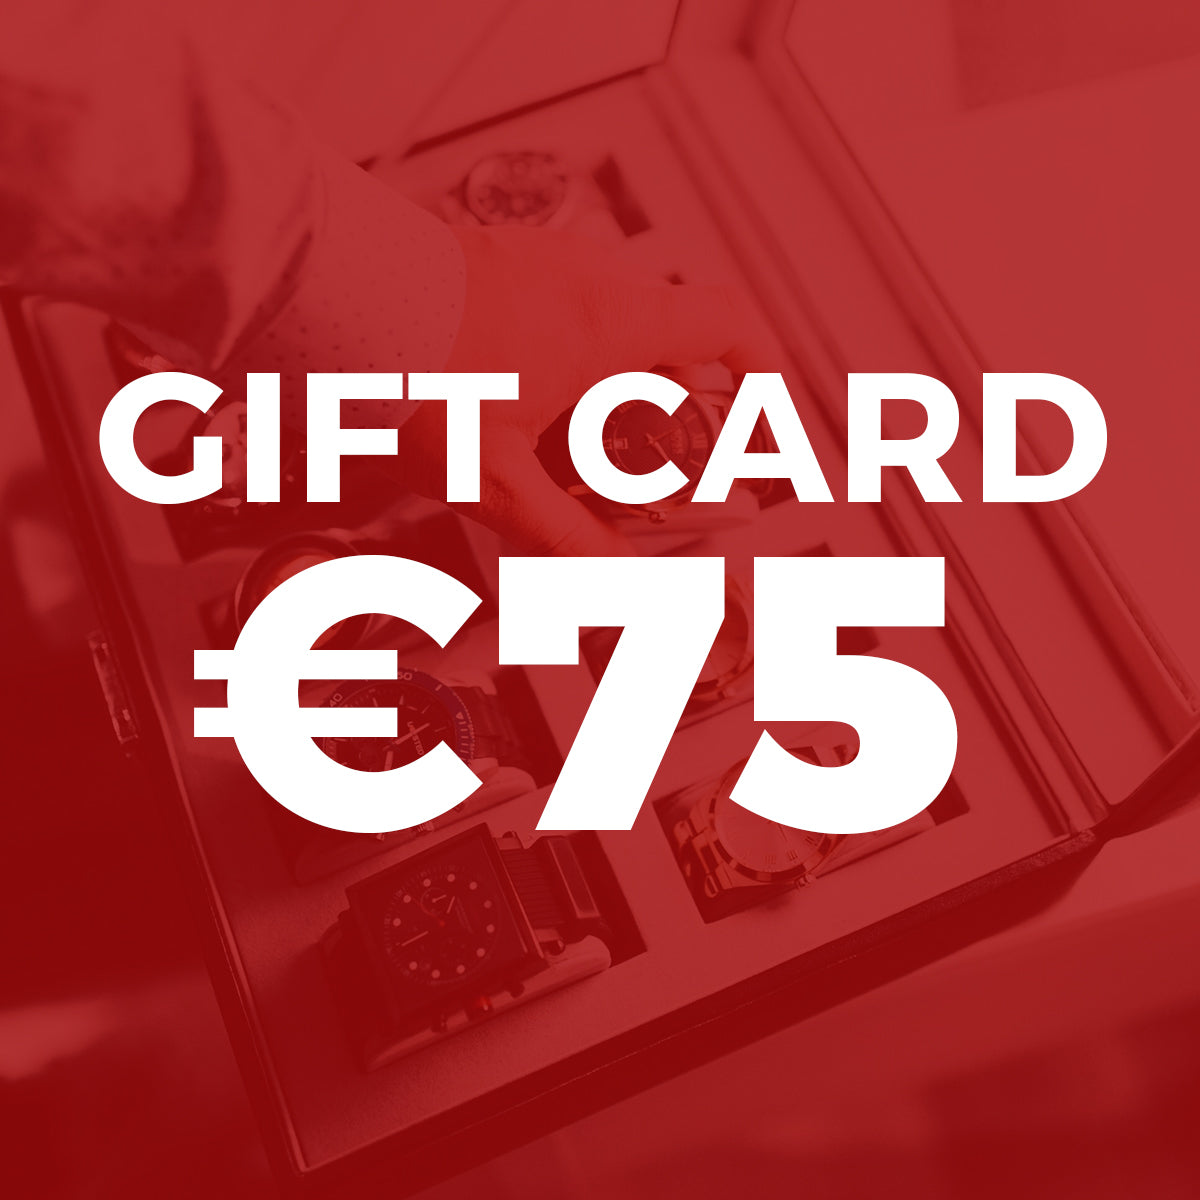 Gift card €25 t/m €100